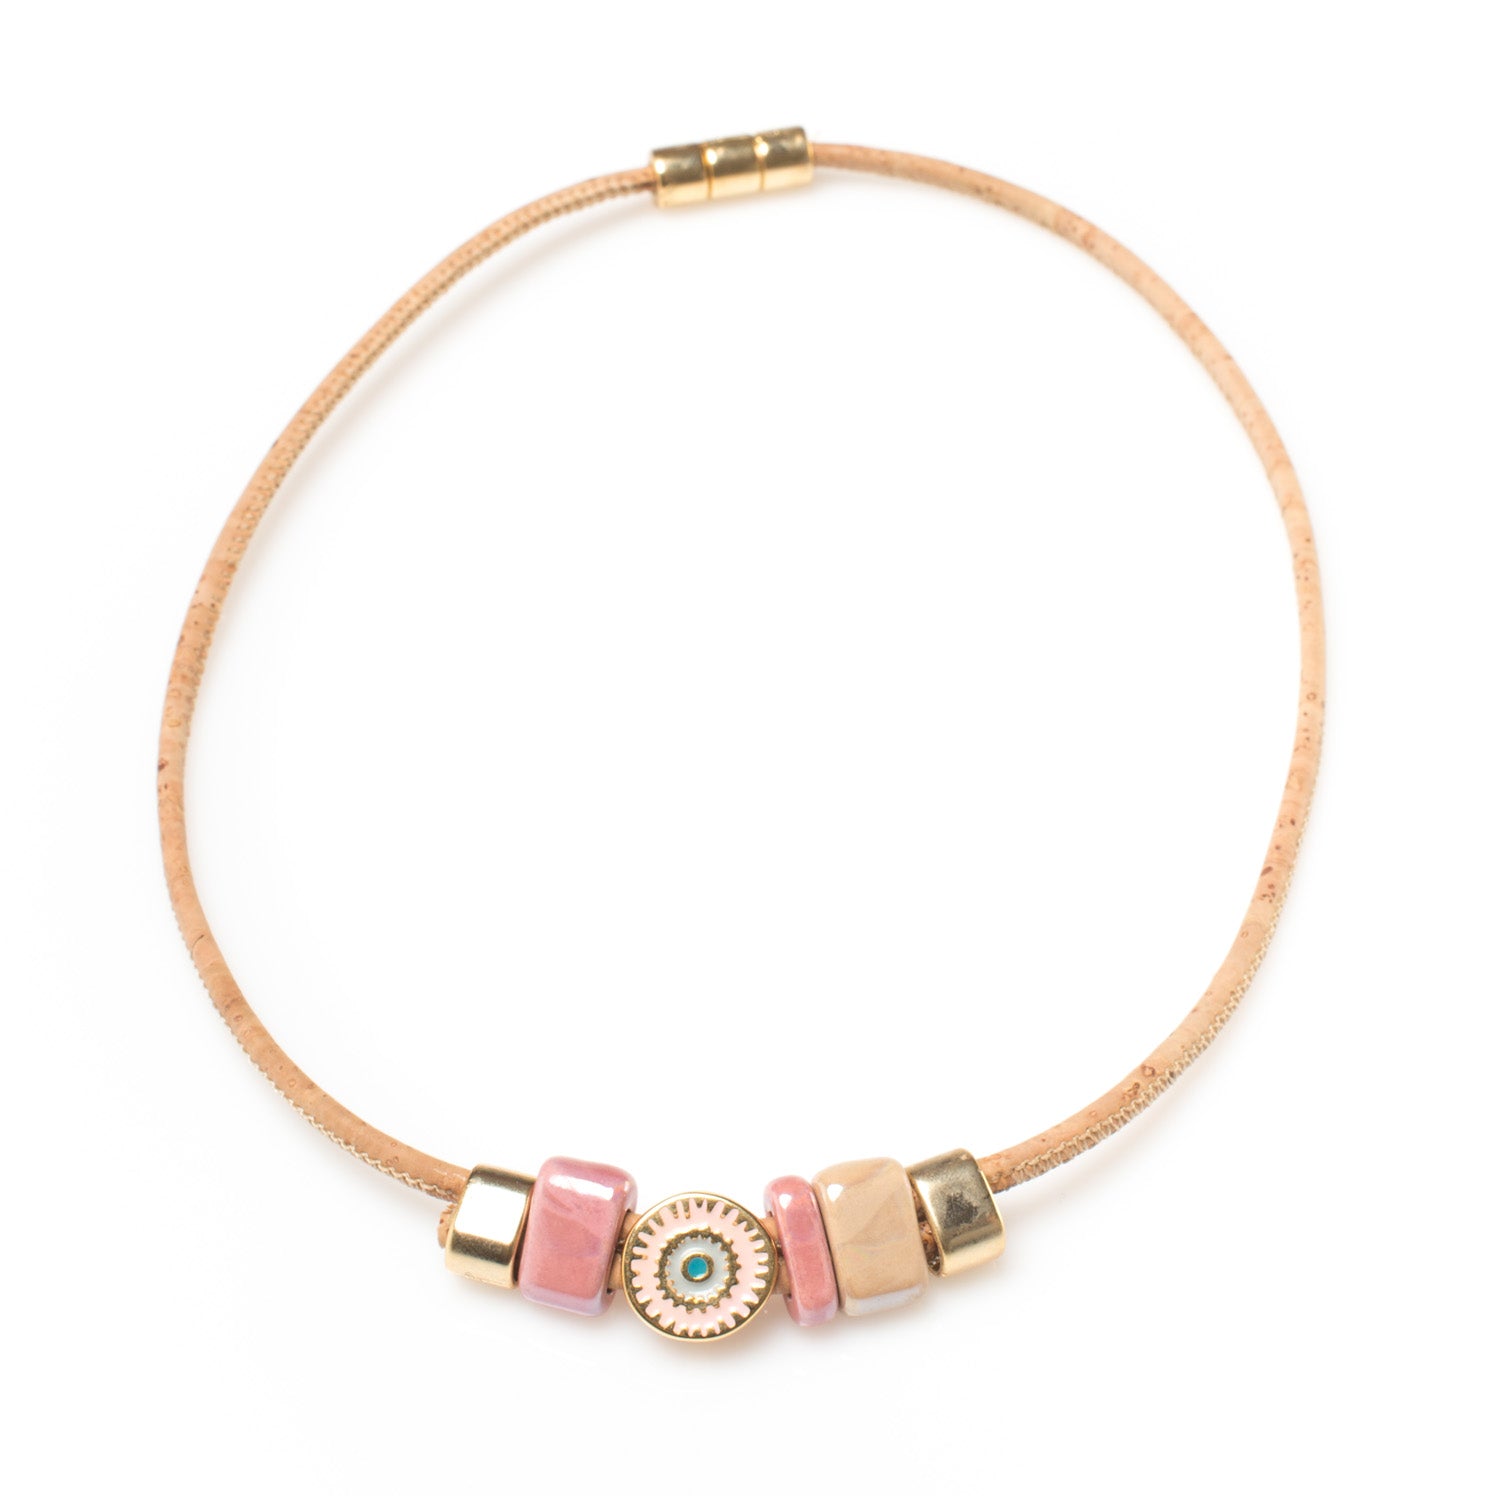 Pink Lucky Eye Cork Necklace | HowCork - The Cork Marketplace